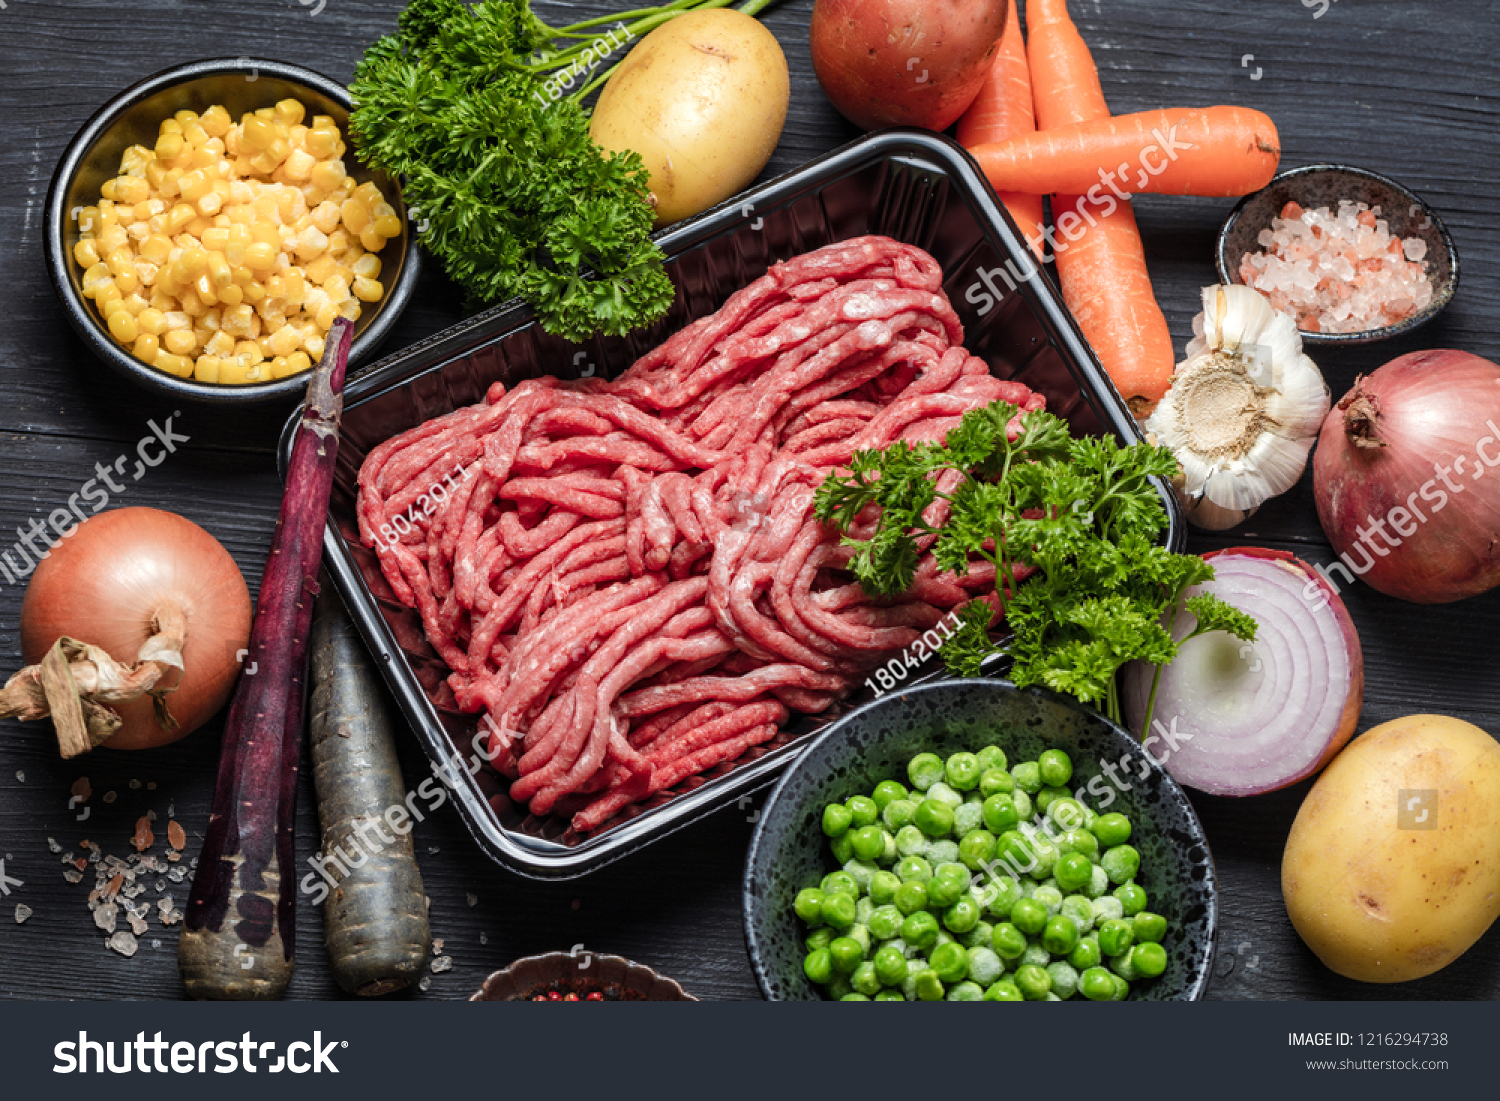 Raw minced meat in container surrounded by ingredients for shepherds pie , green peas, yellow corn, carrot, onion and seasonings, on black background, top view. Horizontal composition  #1216294738